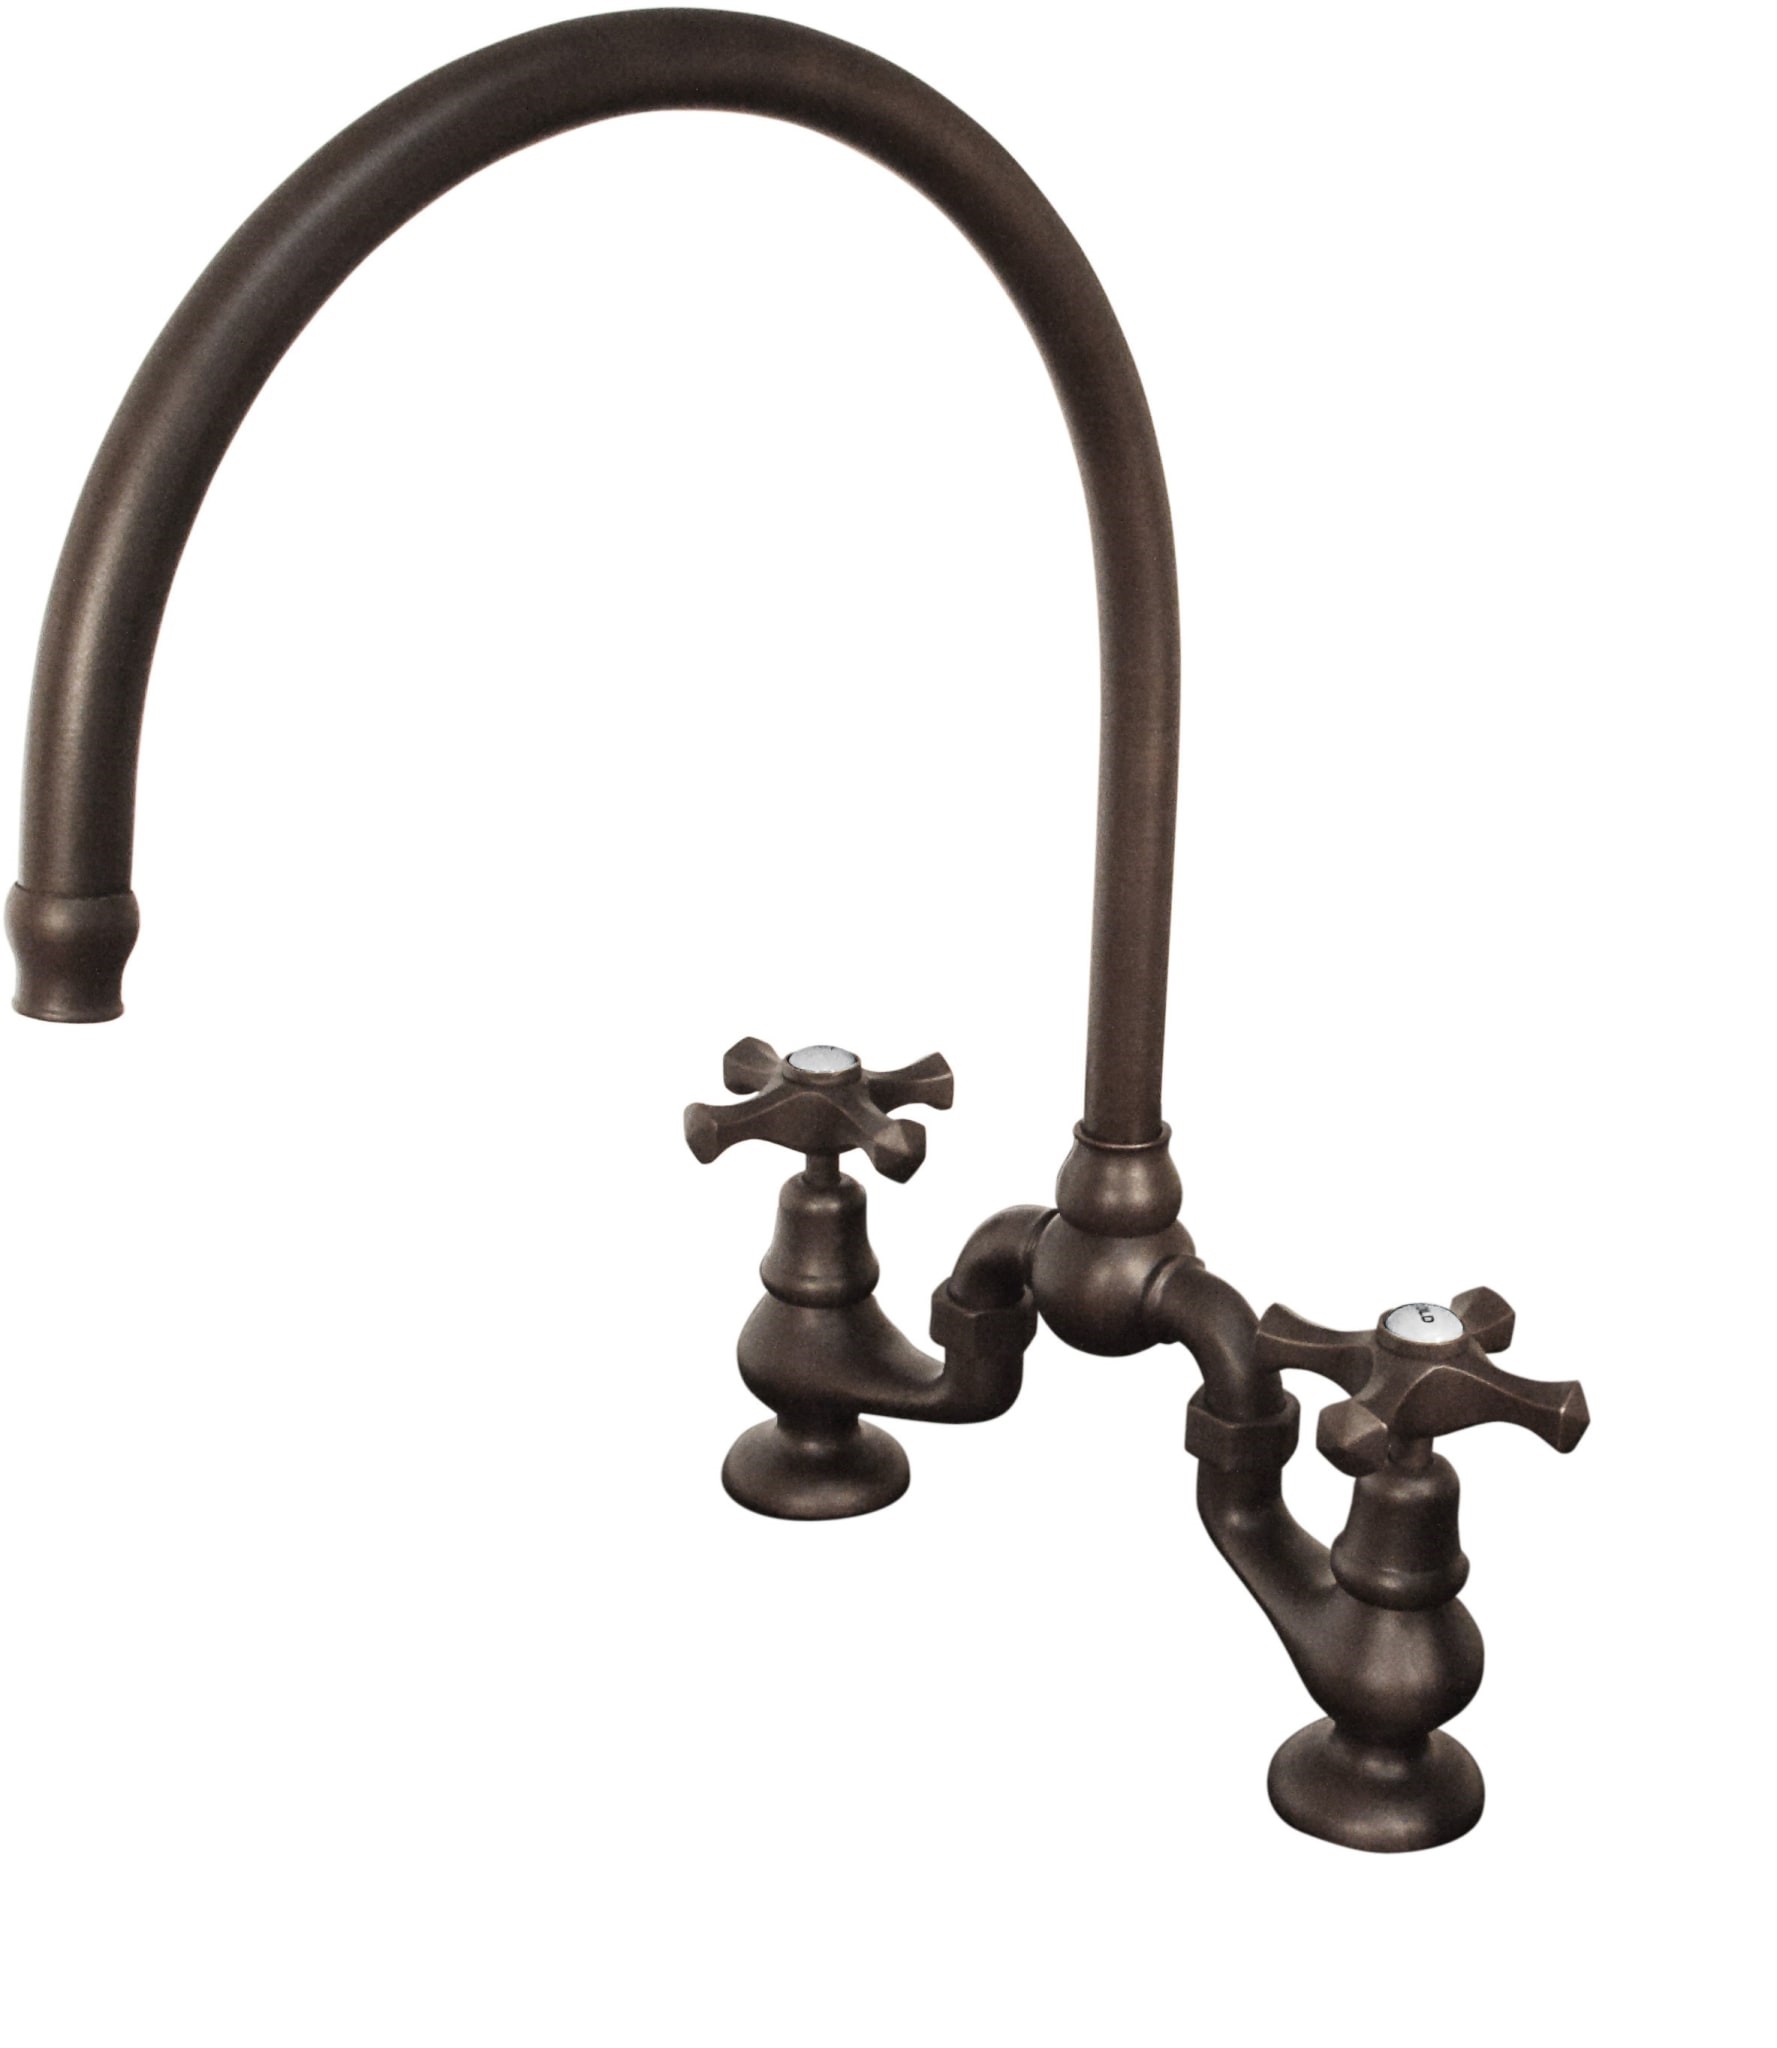 SONOMA FORGE BS-DM-LG BROWNSTONE 15 1/2 INCH TWO HOLES DECK MOUNT BRIDGE KITCHEN FAUCET WITH LARGE SWIVELING SPOUT